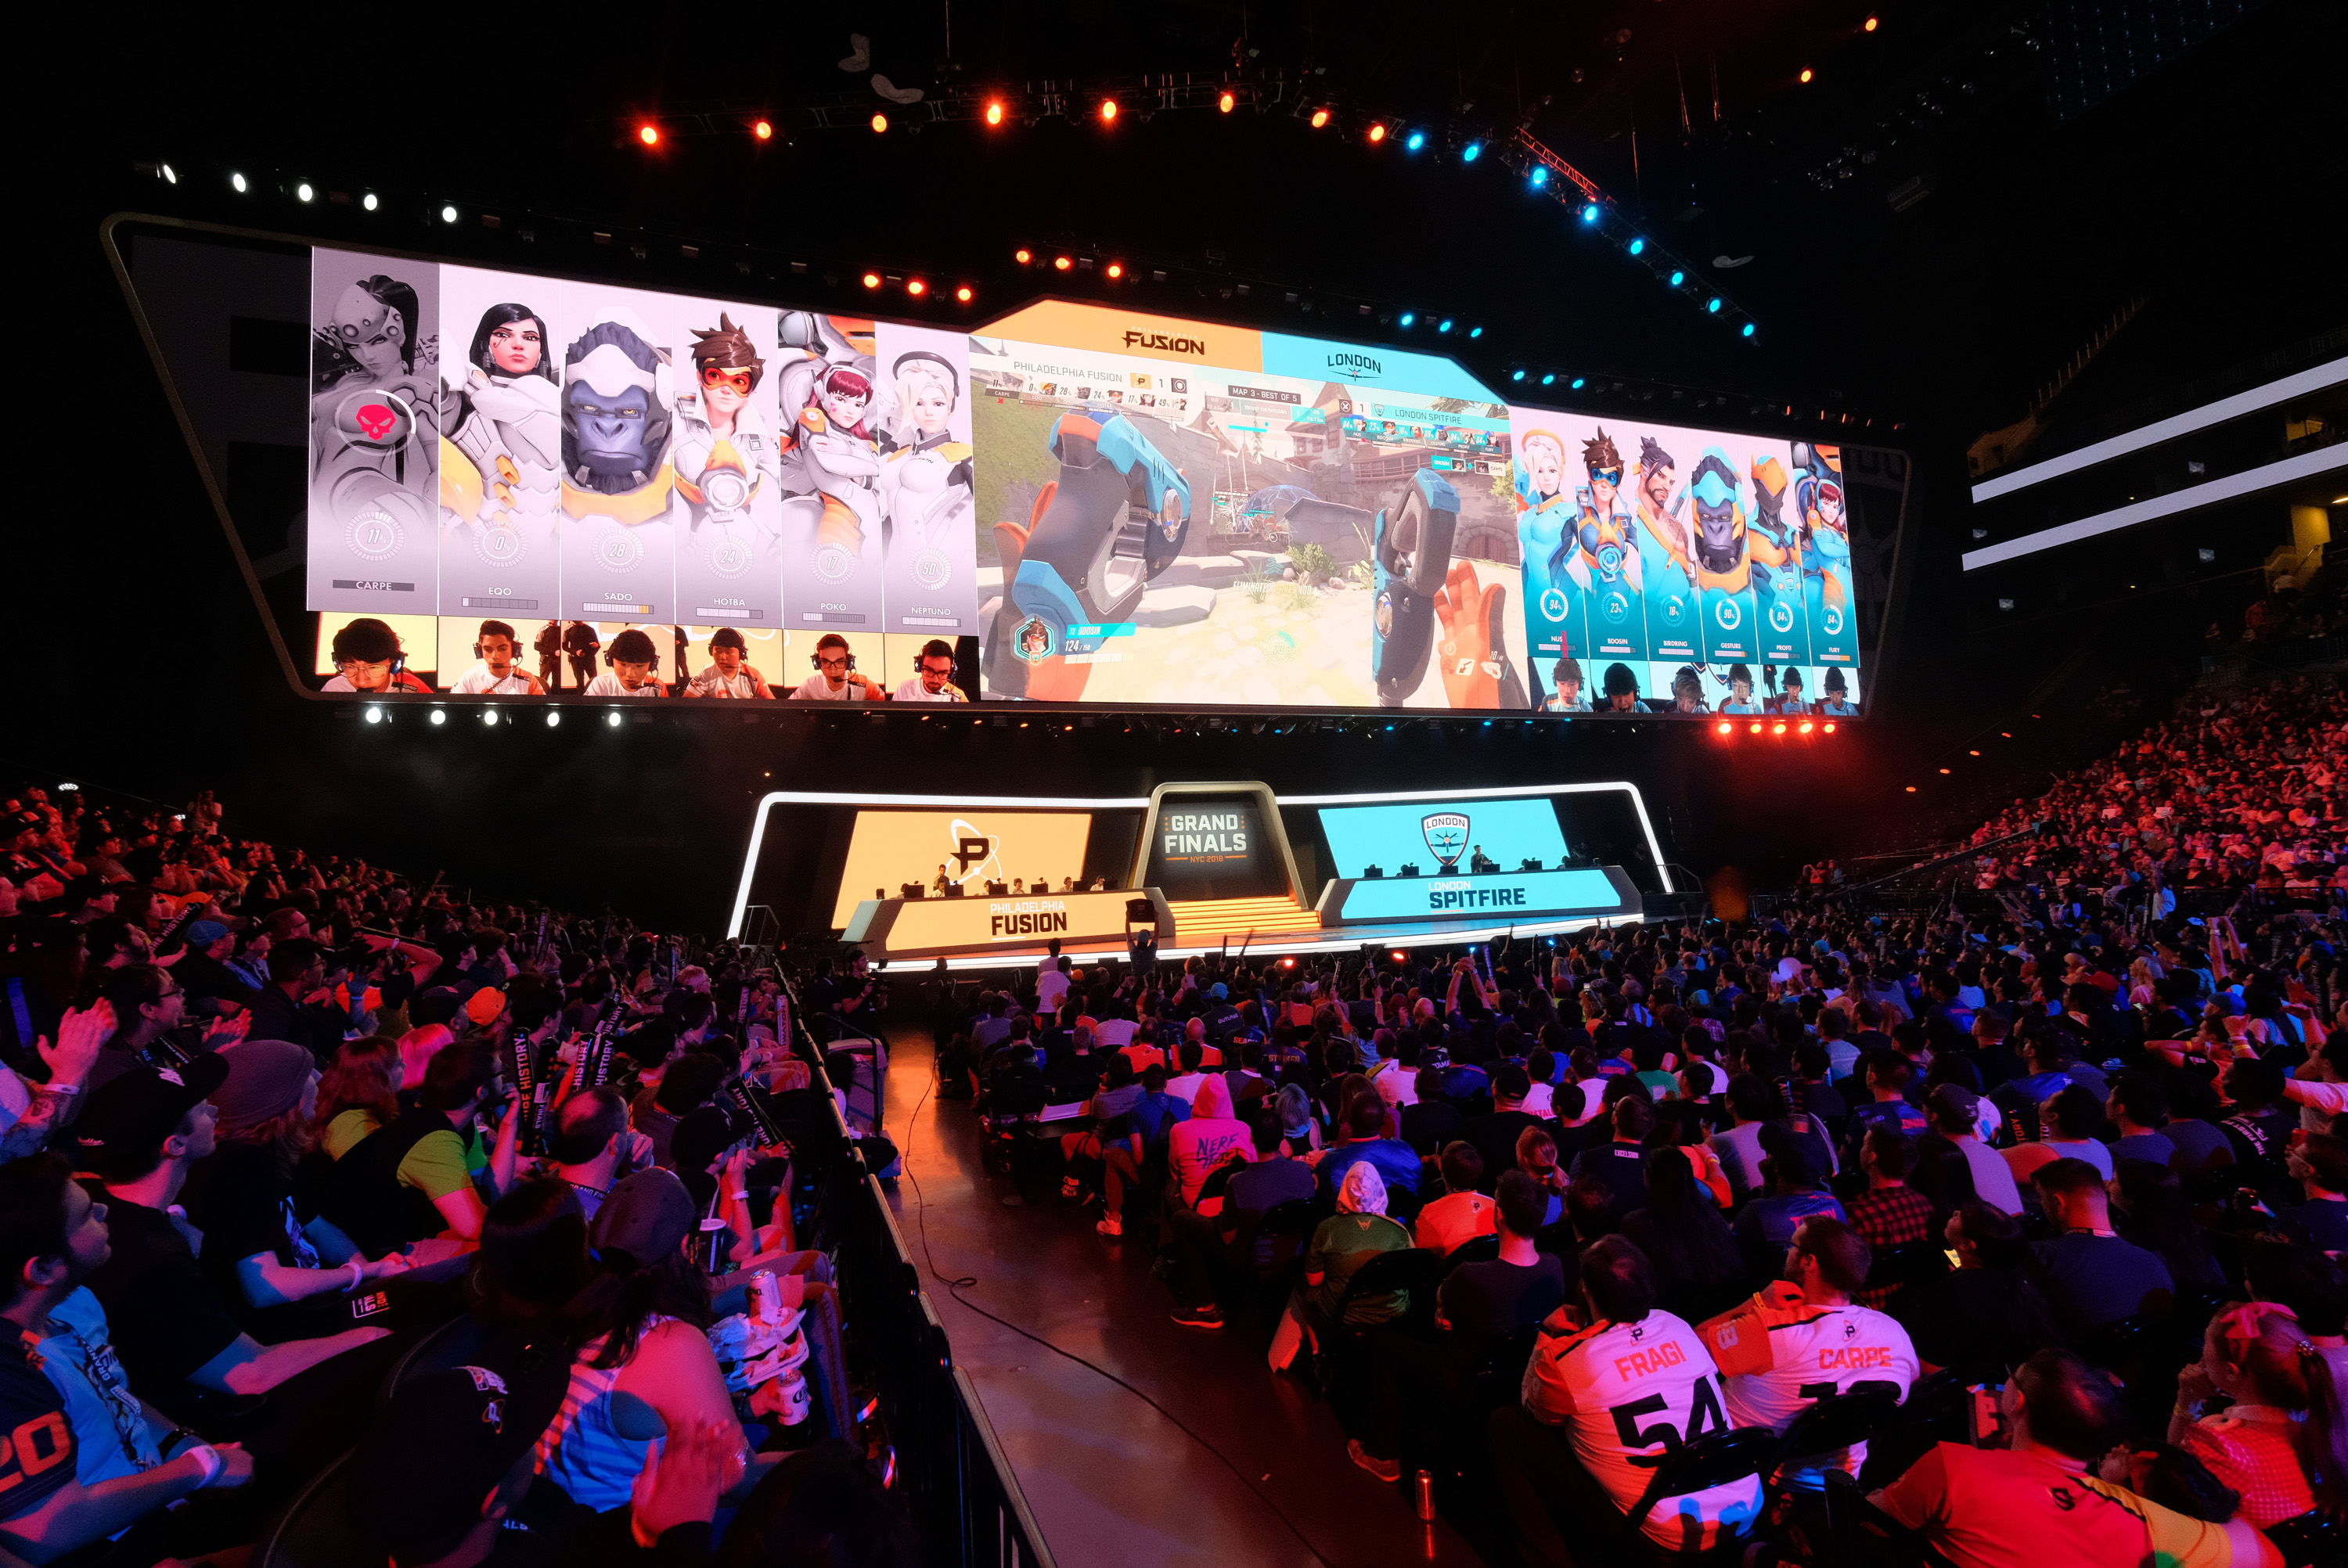 OWL 2018 grand finals stage.